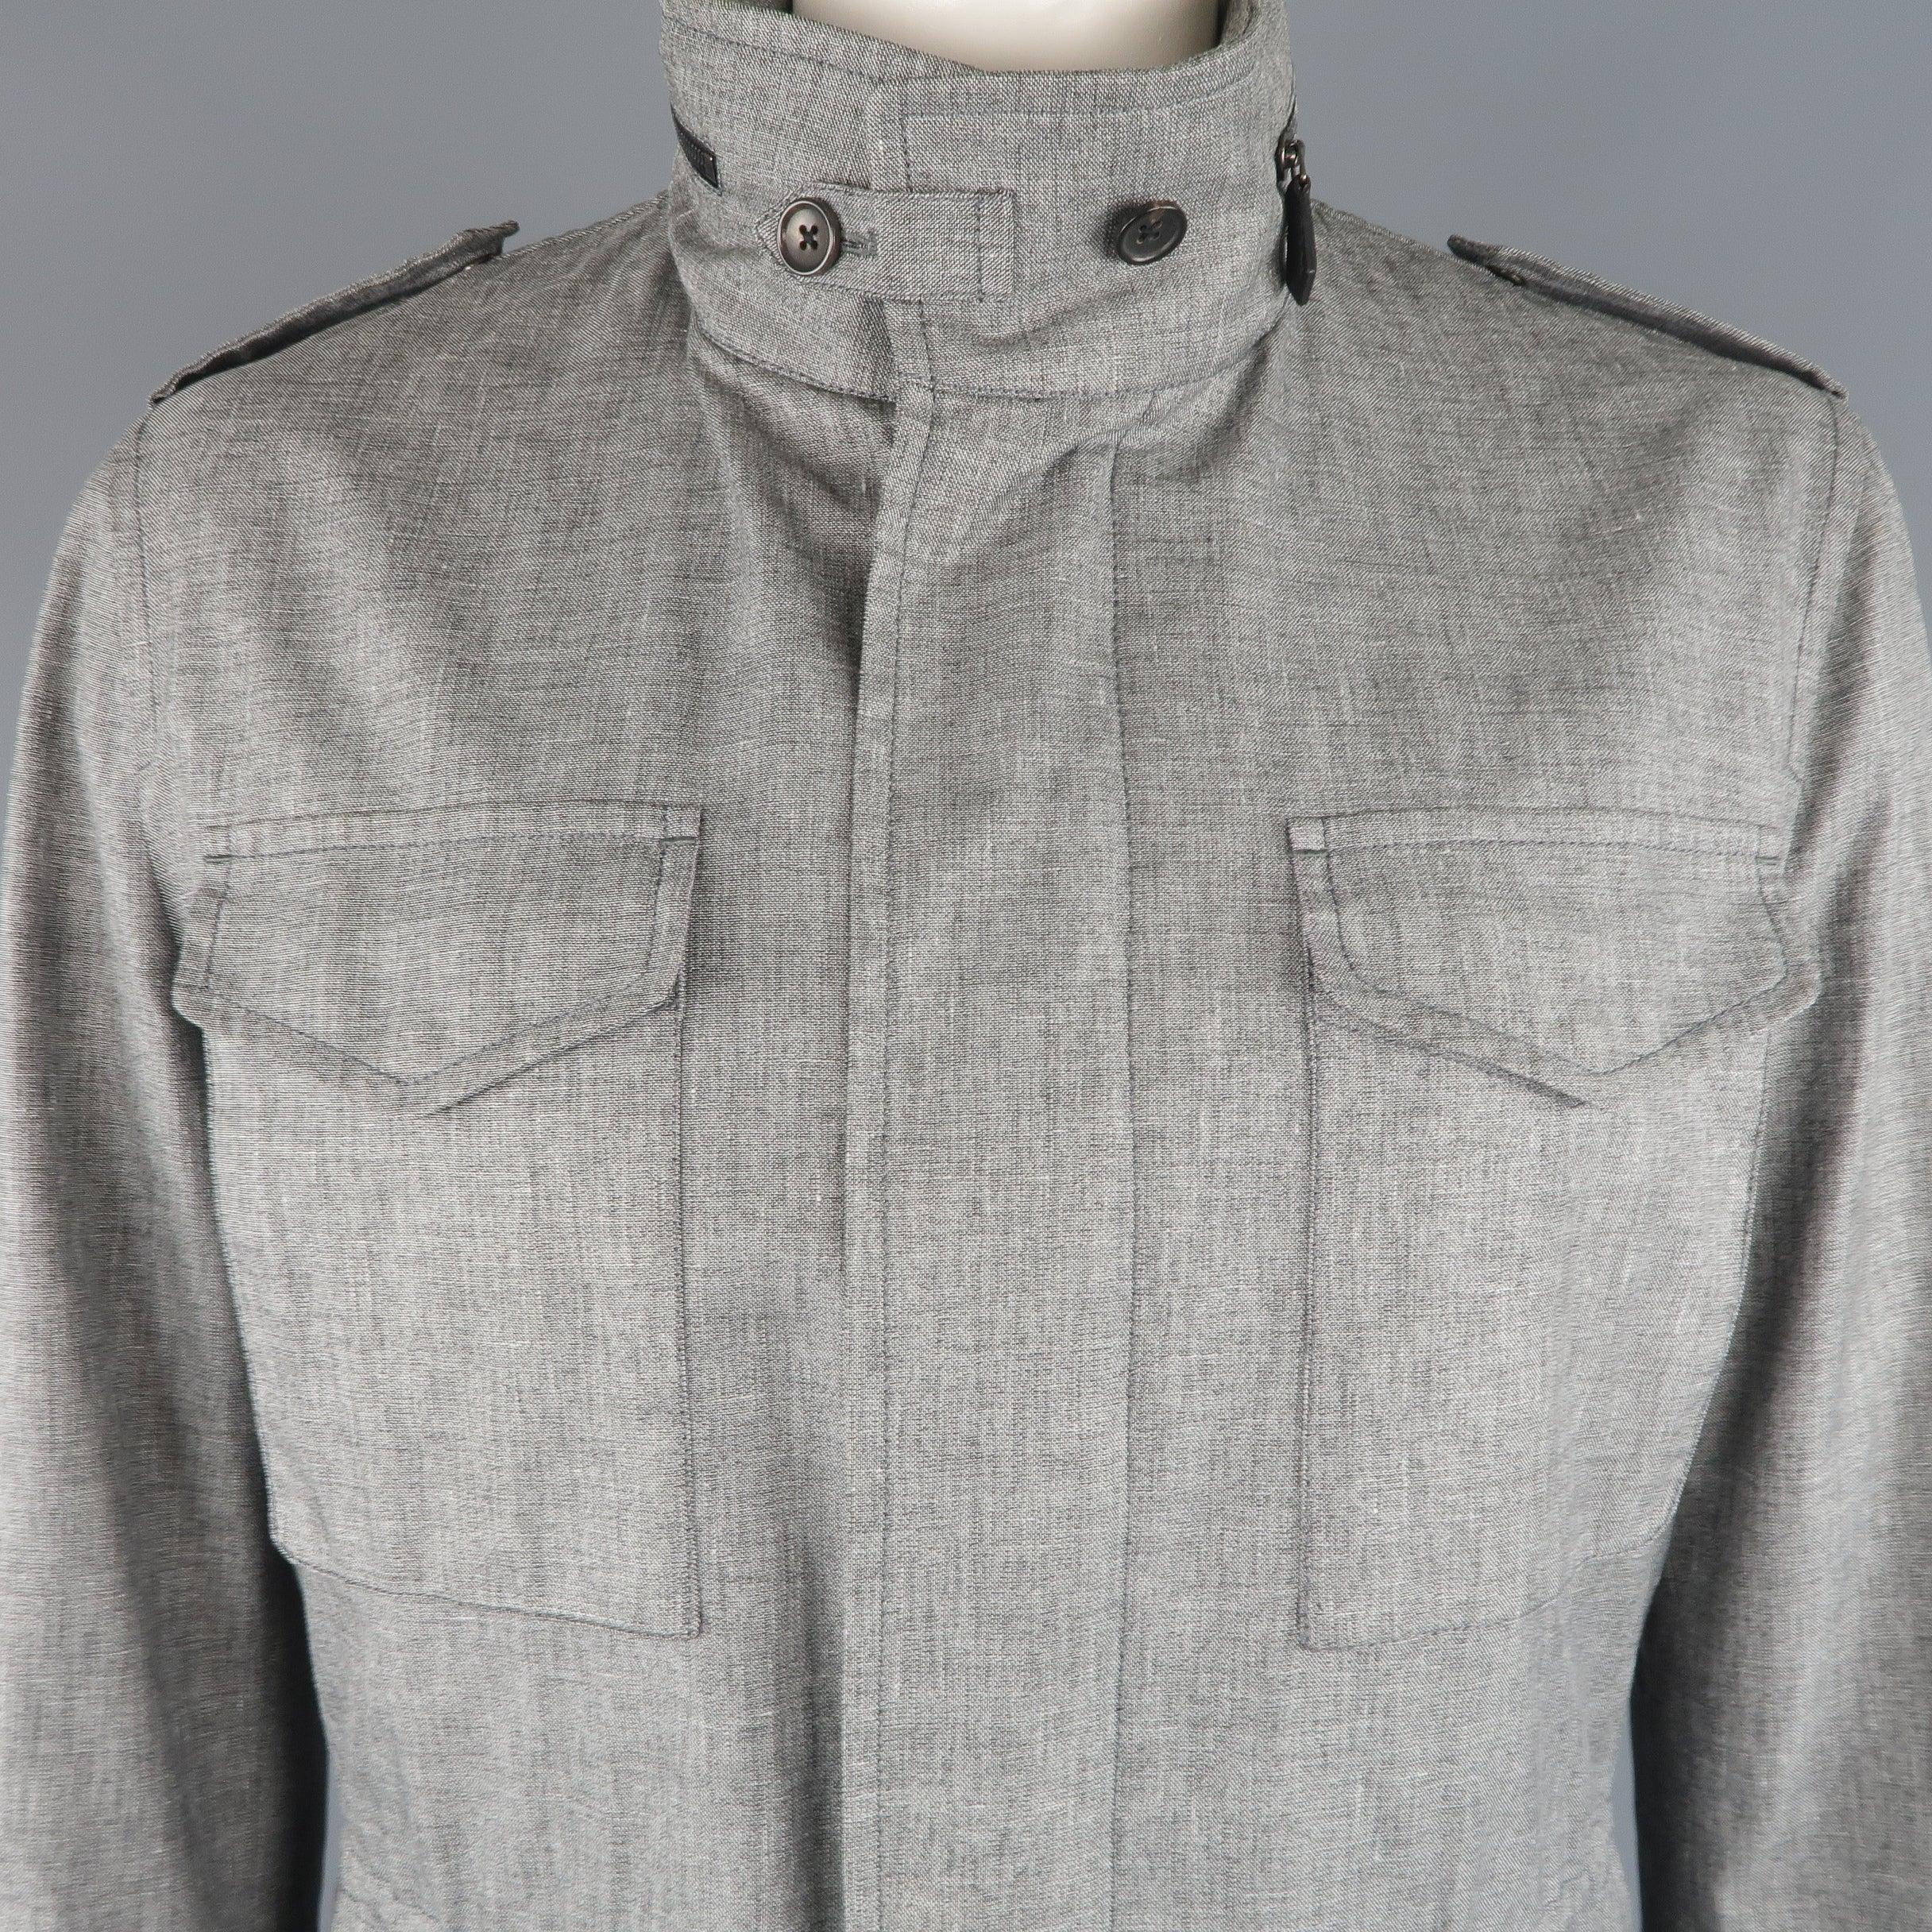 TOM FORD parka comes in linen blend light heather gray fabric with a high collar, epaulets, hidden placket zip closure, drawstring waist, zip out hood, and patch flap pockets. Minor wear. Made in Italy.
 Good Pre-Owned Condition.
  
 

 Marked:  IT